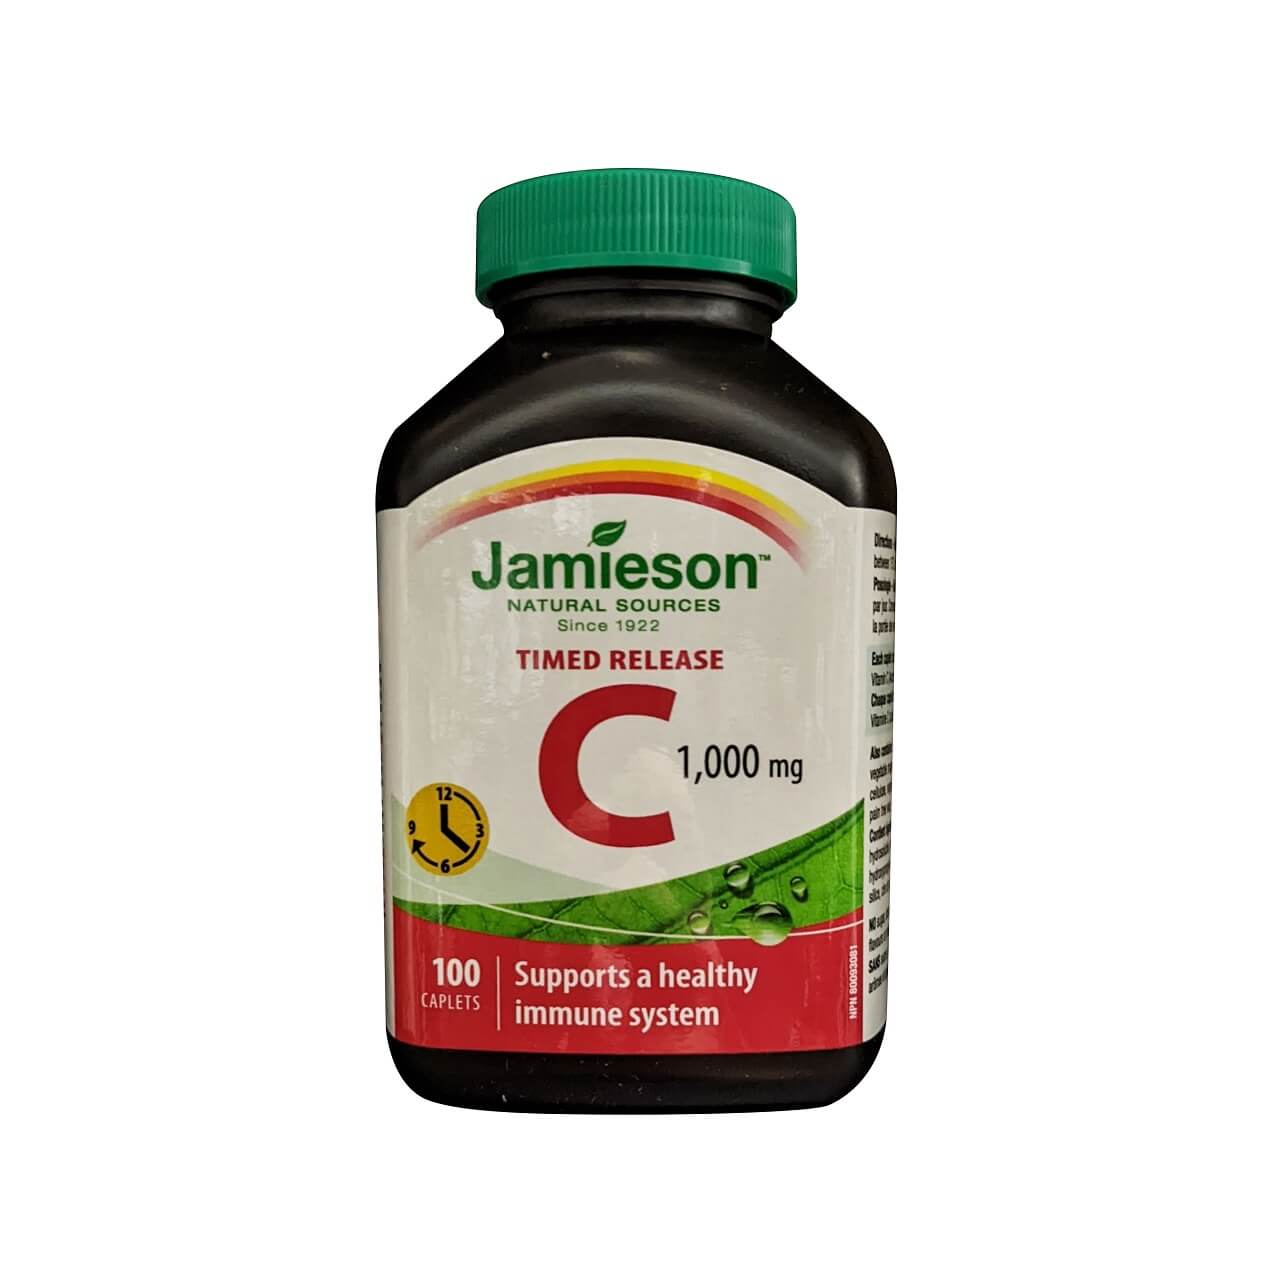 Product label for Jamieson Vitamin C 1000 mg Timed Release (100 caplets) in English